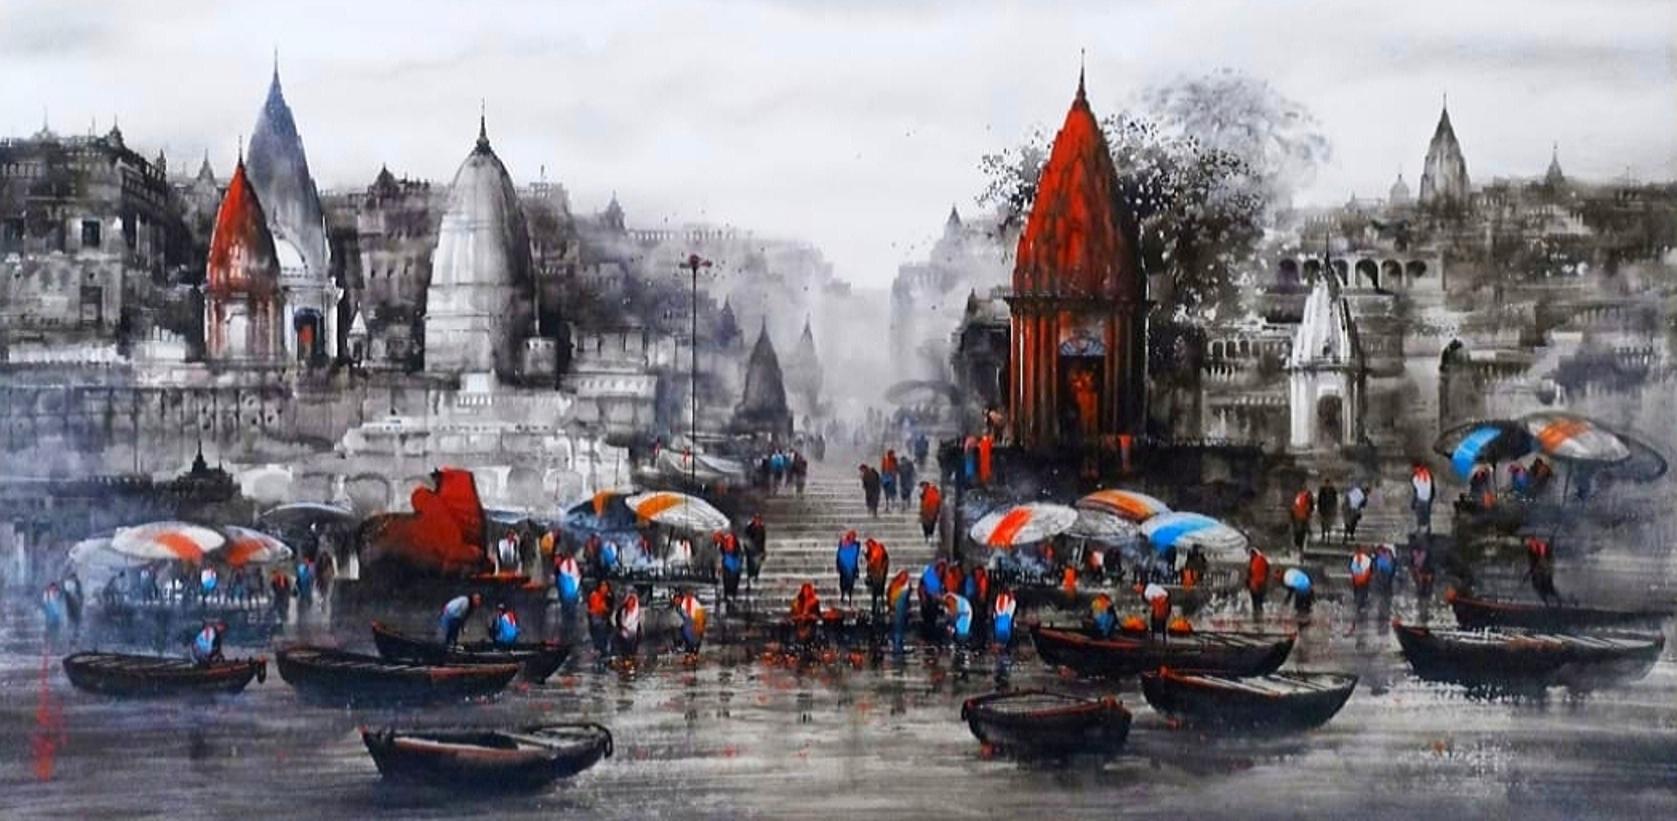 Asif Hussain Figurative Painting - Banaras Ghats, Acrylic on Canvas, Red, Black by Contemporary Artist "In Stock"